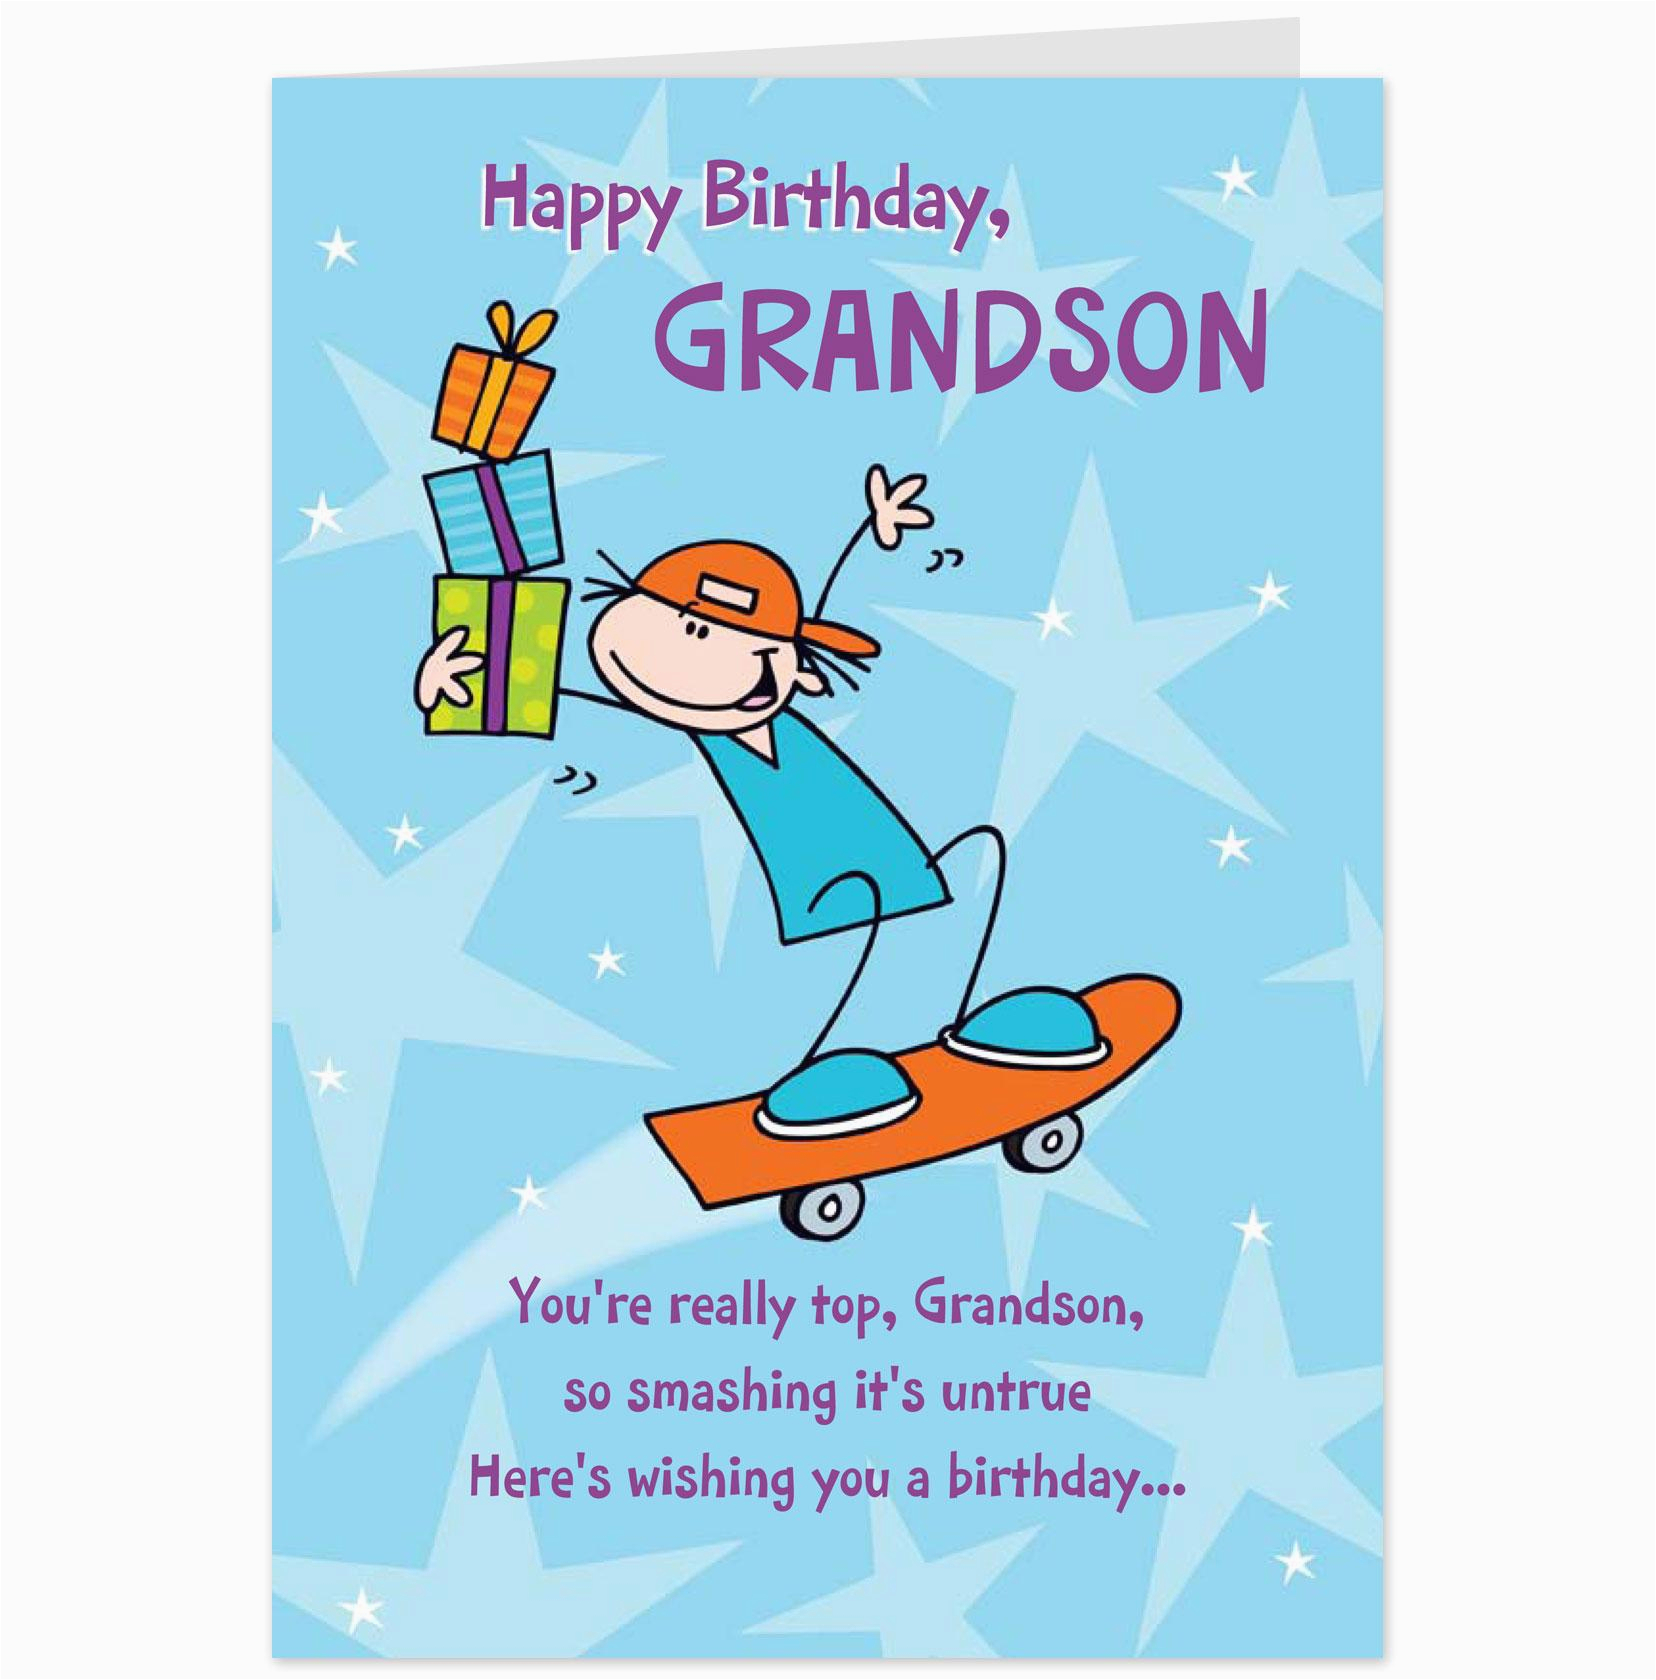 7 best images of grandson birthday greeting cards